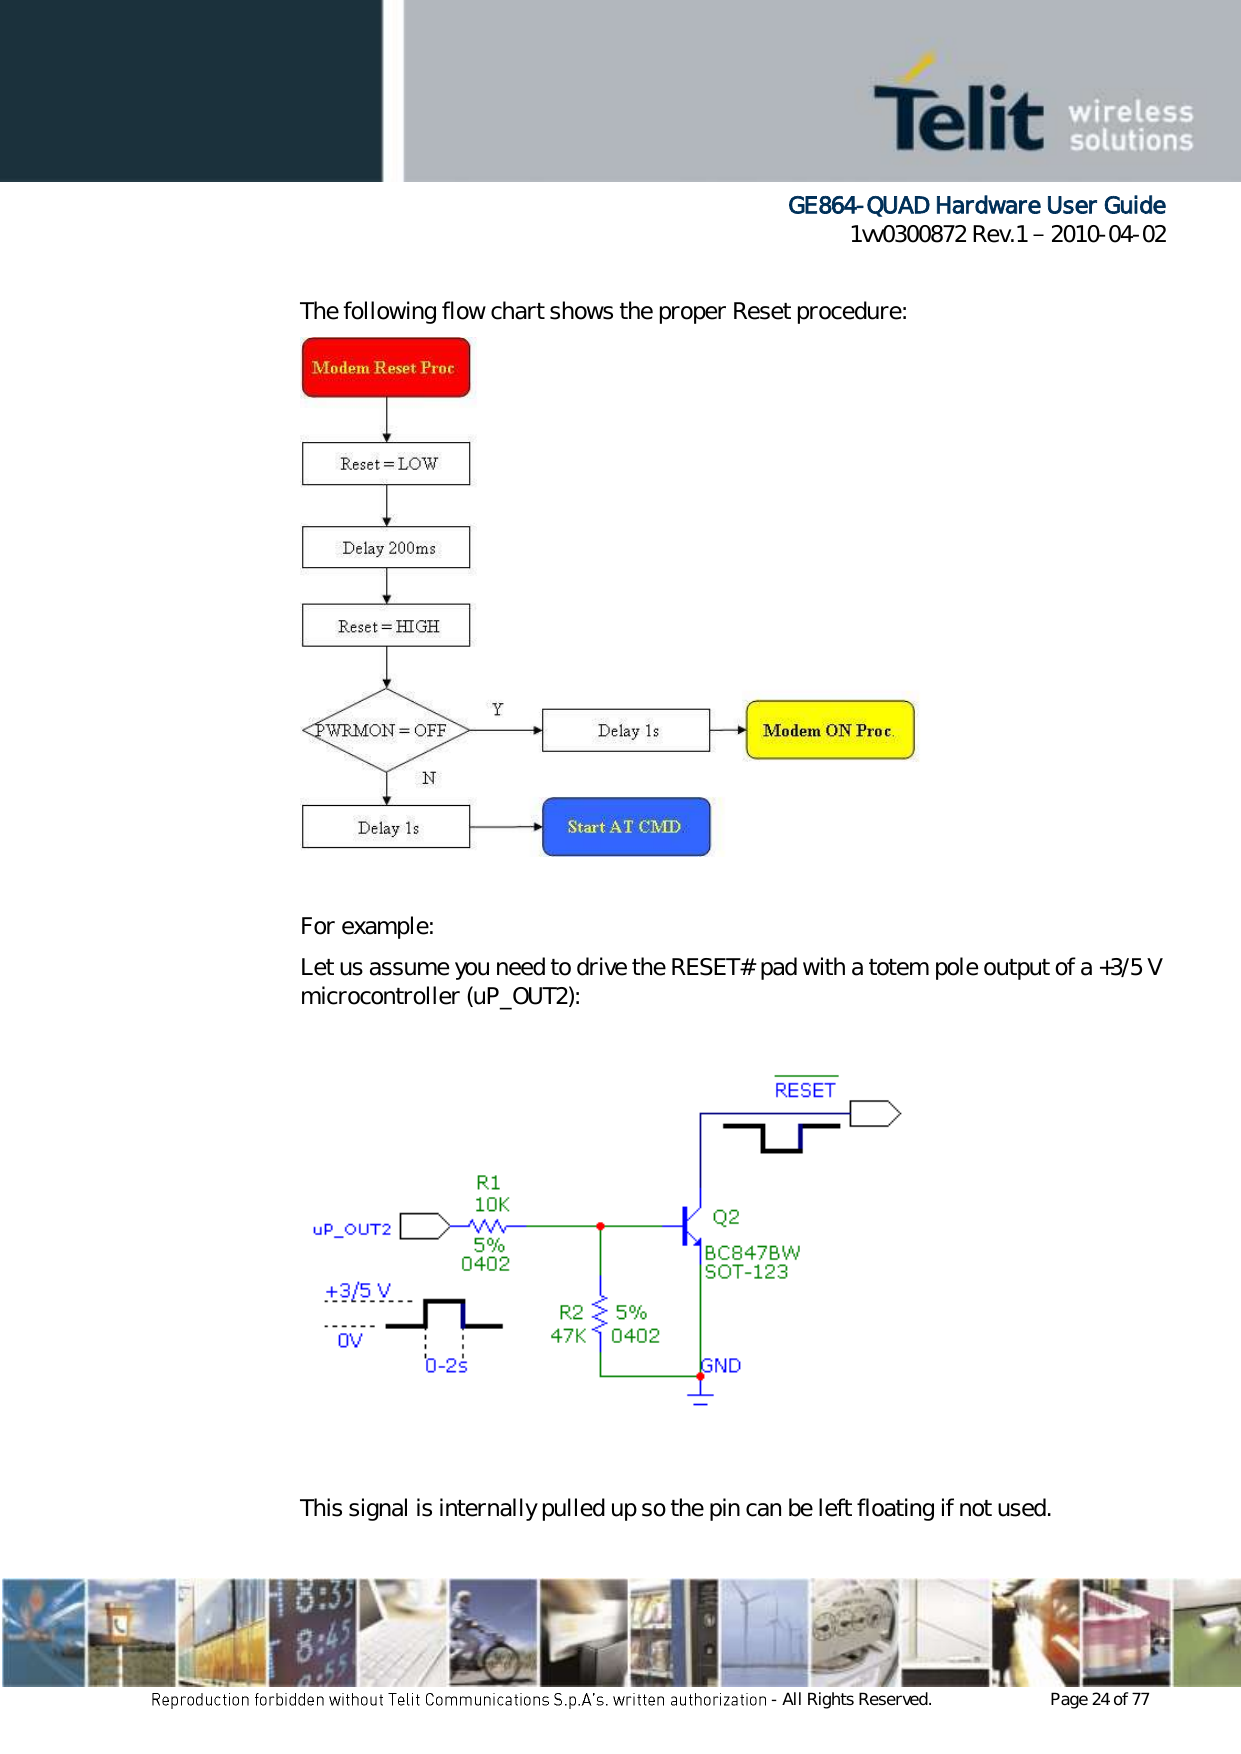      GE864-QUAD Hardware User Guide 1vv0300872 Rev.1   2010-04-02 - All Rights Reserved.    Page 24 of 77   The following flow chart shows the proper Reset procedure:   For example: Let us assume you need to drive the RESET# pad with a totem pole output of a +3/5 V microcontroller (uP_OUT2):    This signal is internally pulled up so the pin can be left floating if not used. 